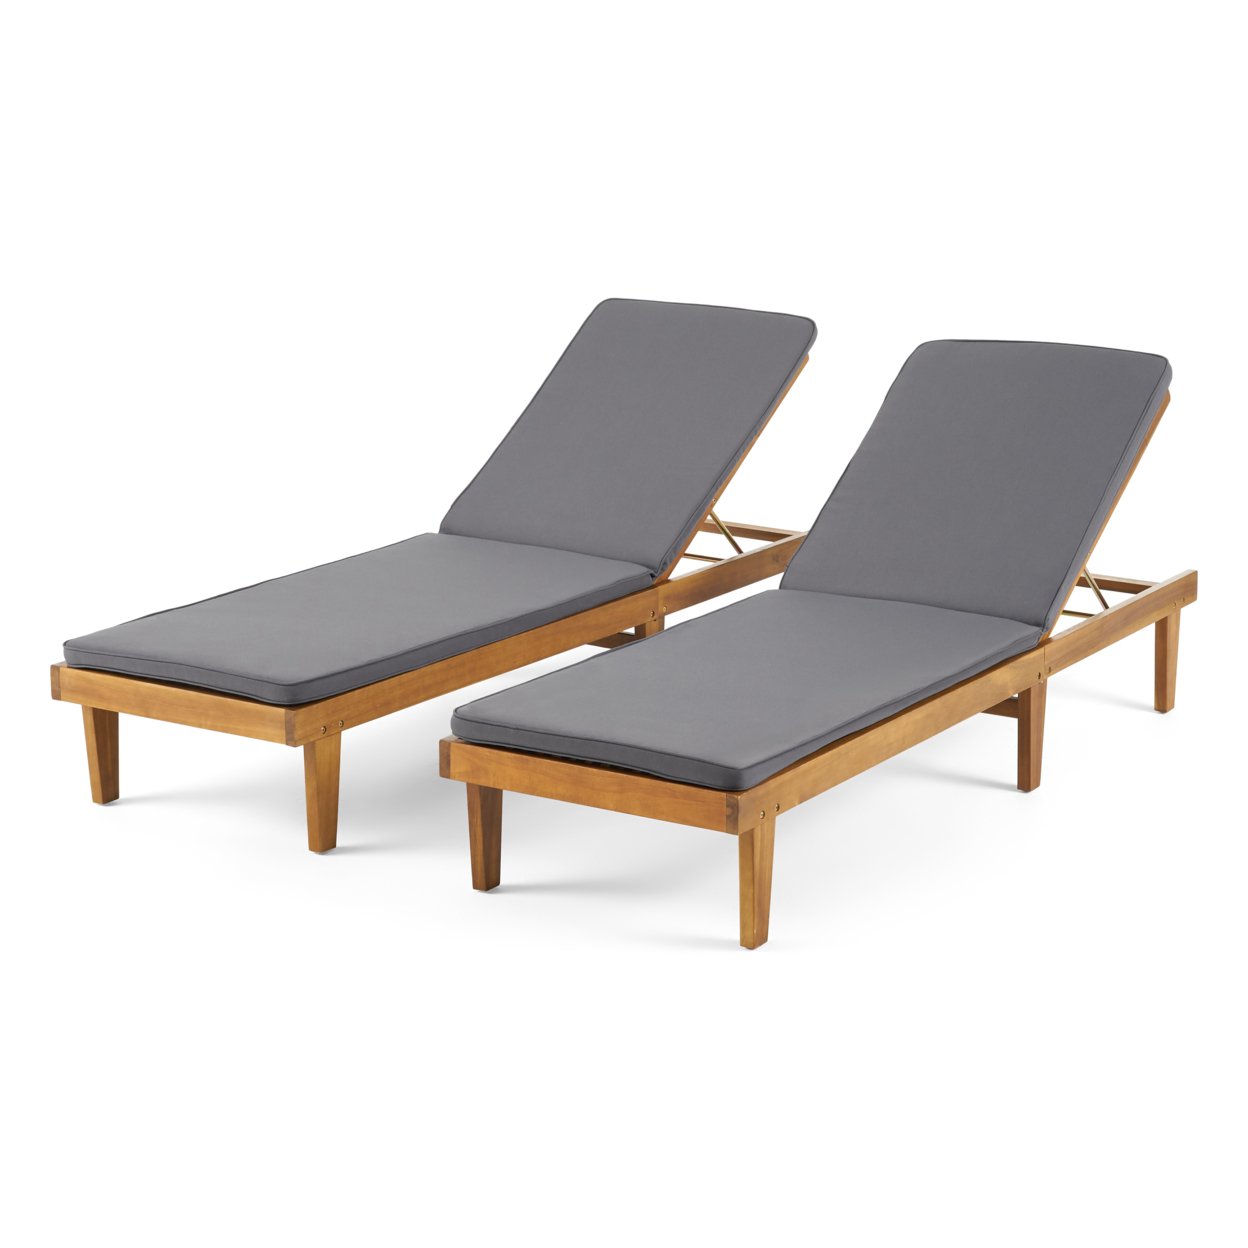 Madge Oudoor Modern Acacia Wood Chaise Lounge With Cushion (Set Of 2) - Teak Finish + Dark Gray